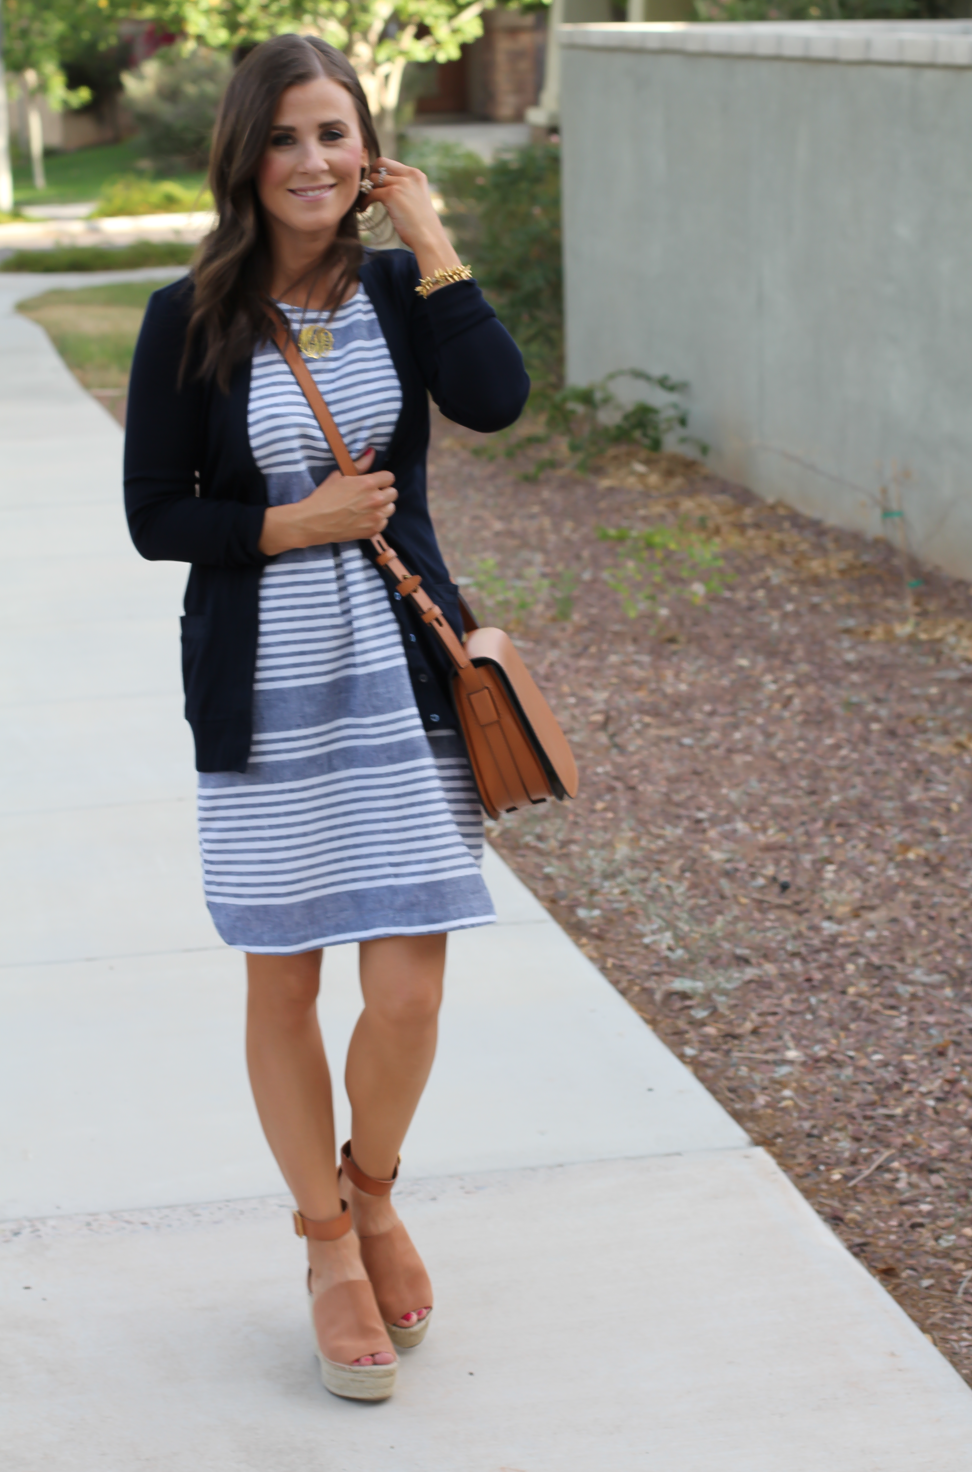 Blue Chambray White Striped Dress, Navy Cotton Cardigan, Tan Suede Espadrilles, Tan Leather Crossbody, Old Navy, J.Crew, Chloe, Tory Burch 5